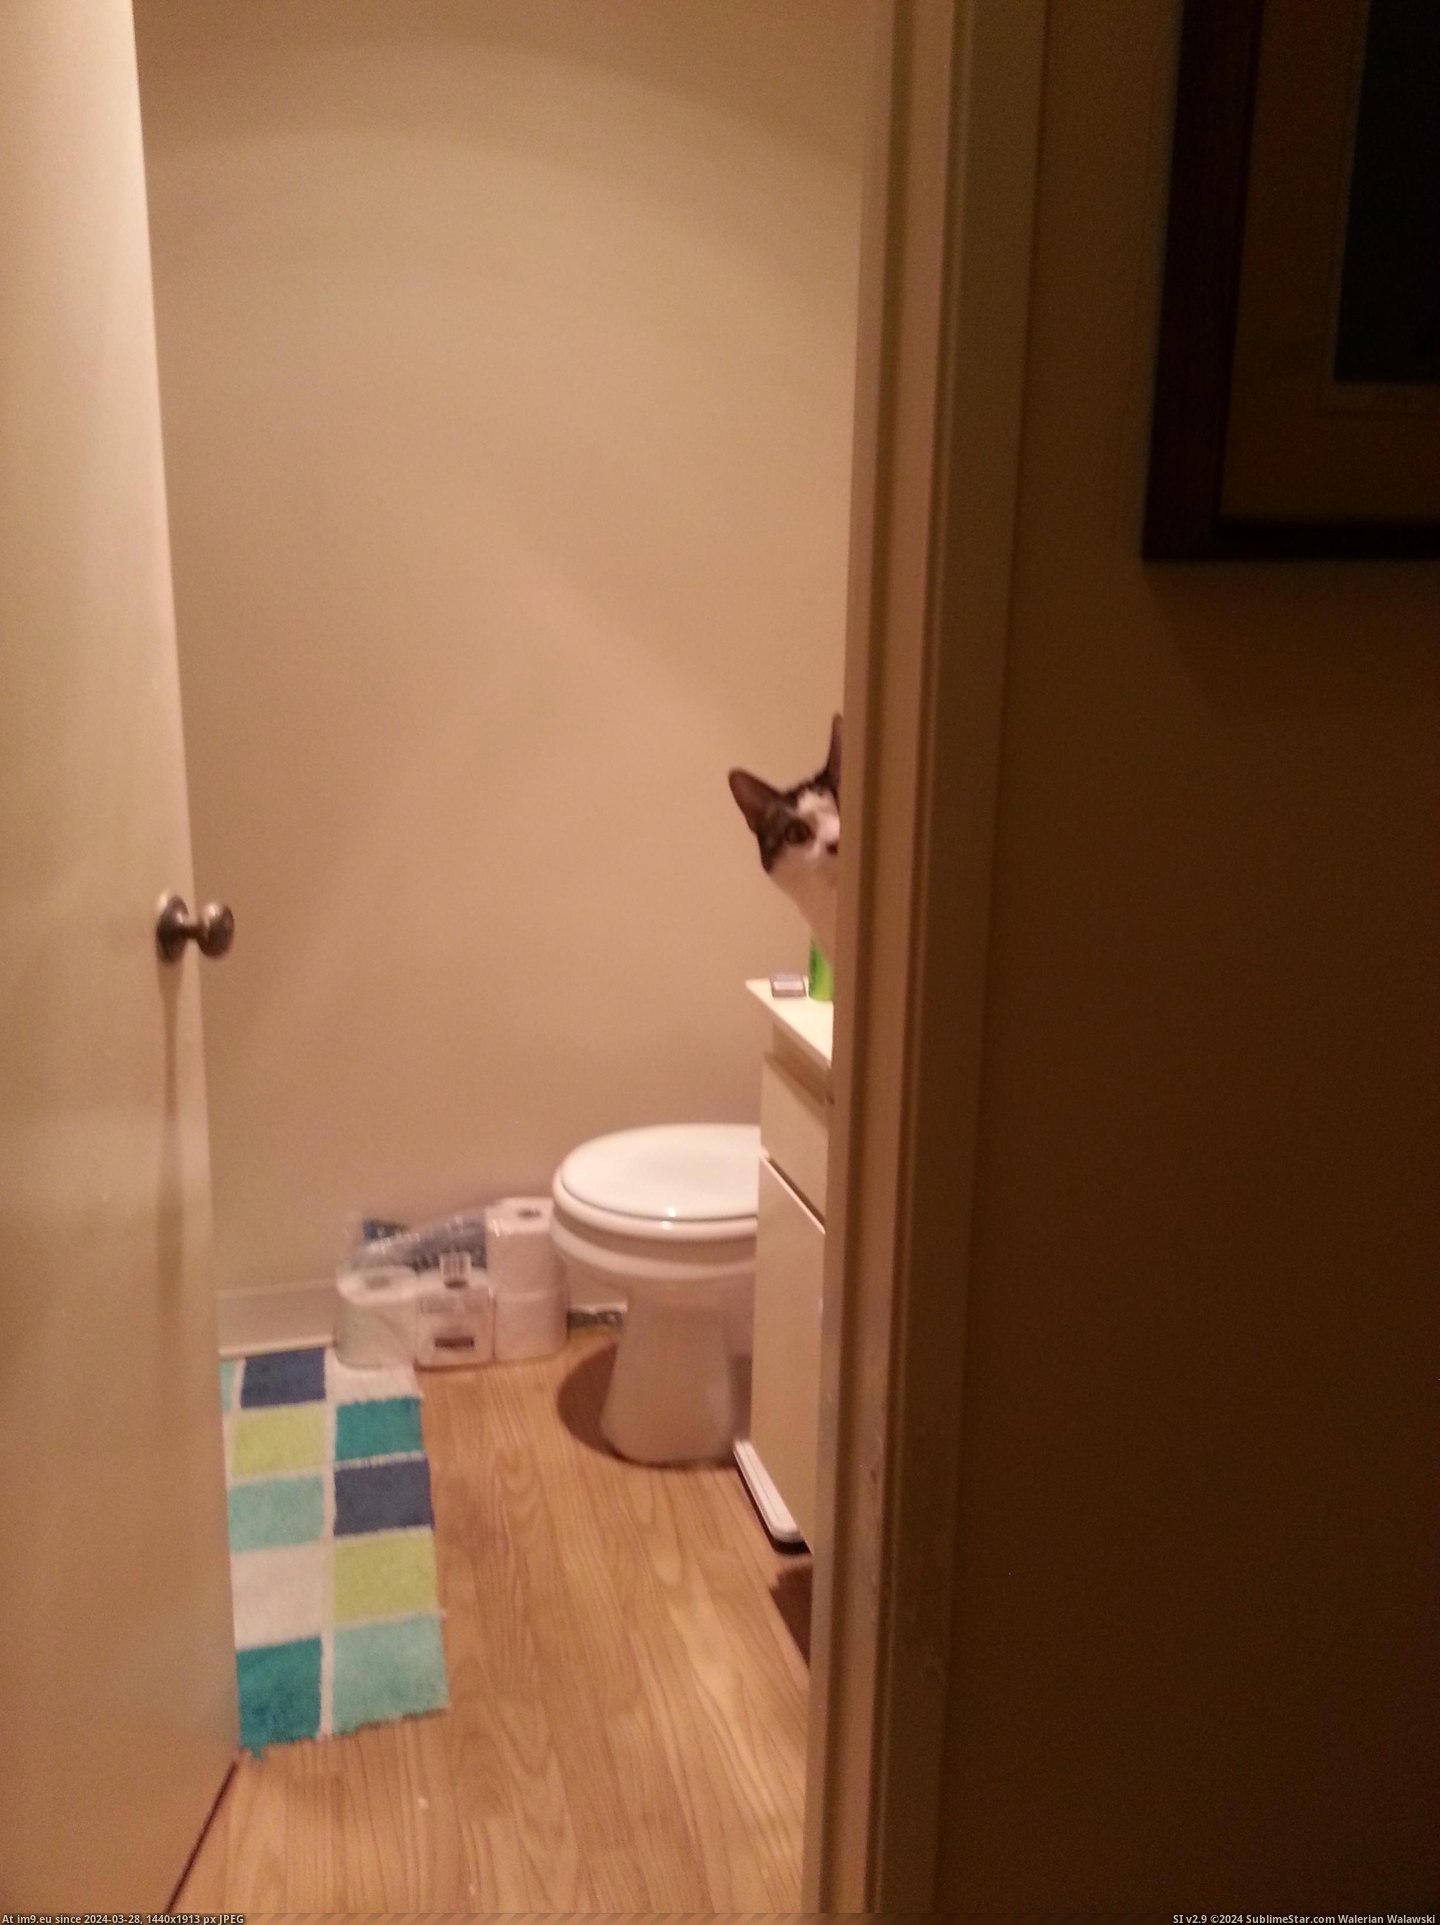 #Cats #For #Cat #Him #Run #Way #Water #Bathroom [Cats] This is my cat's way of asking me to run the water for him in the bathroom Pic. (Image of album My r/CATS favs))